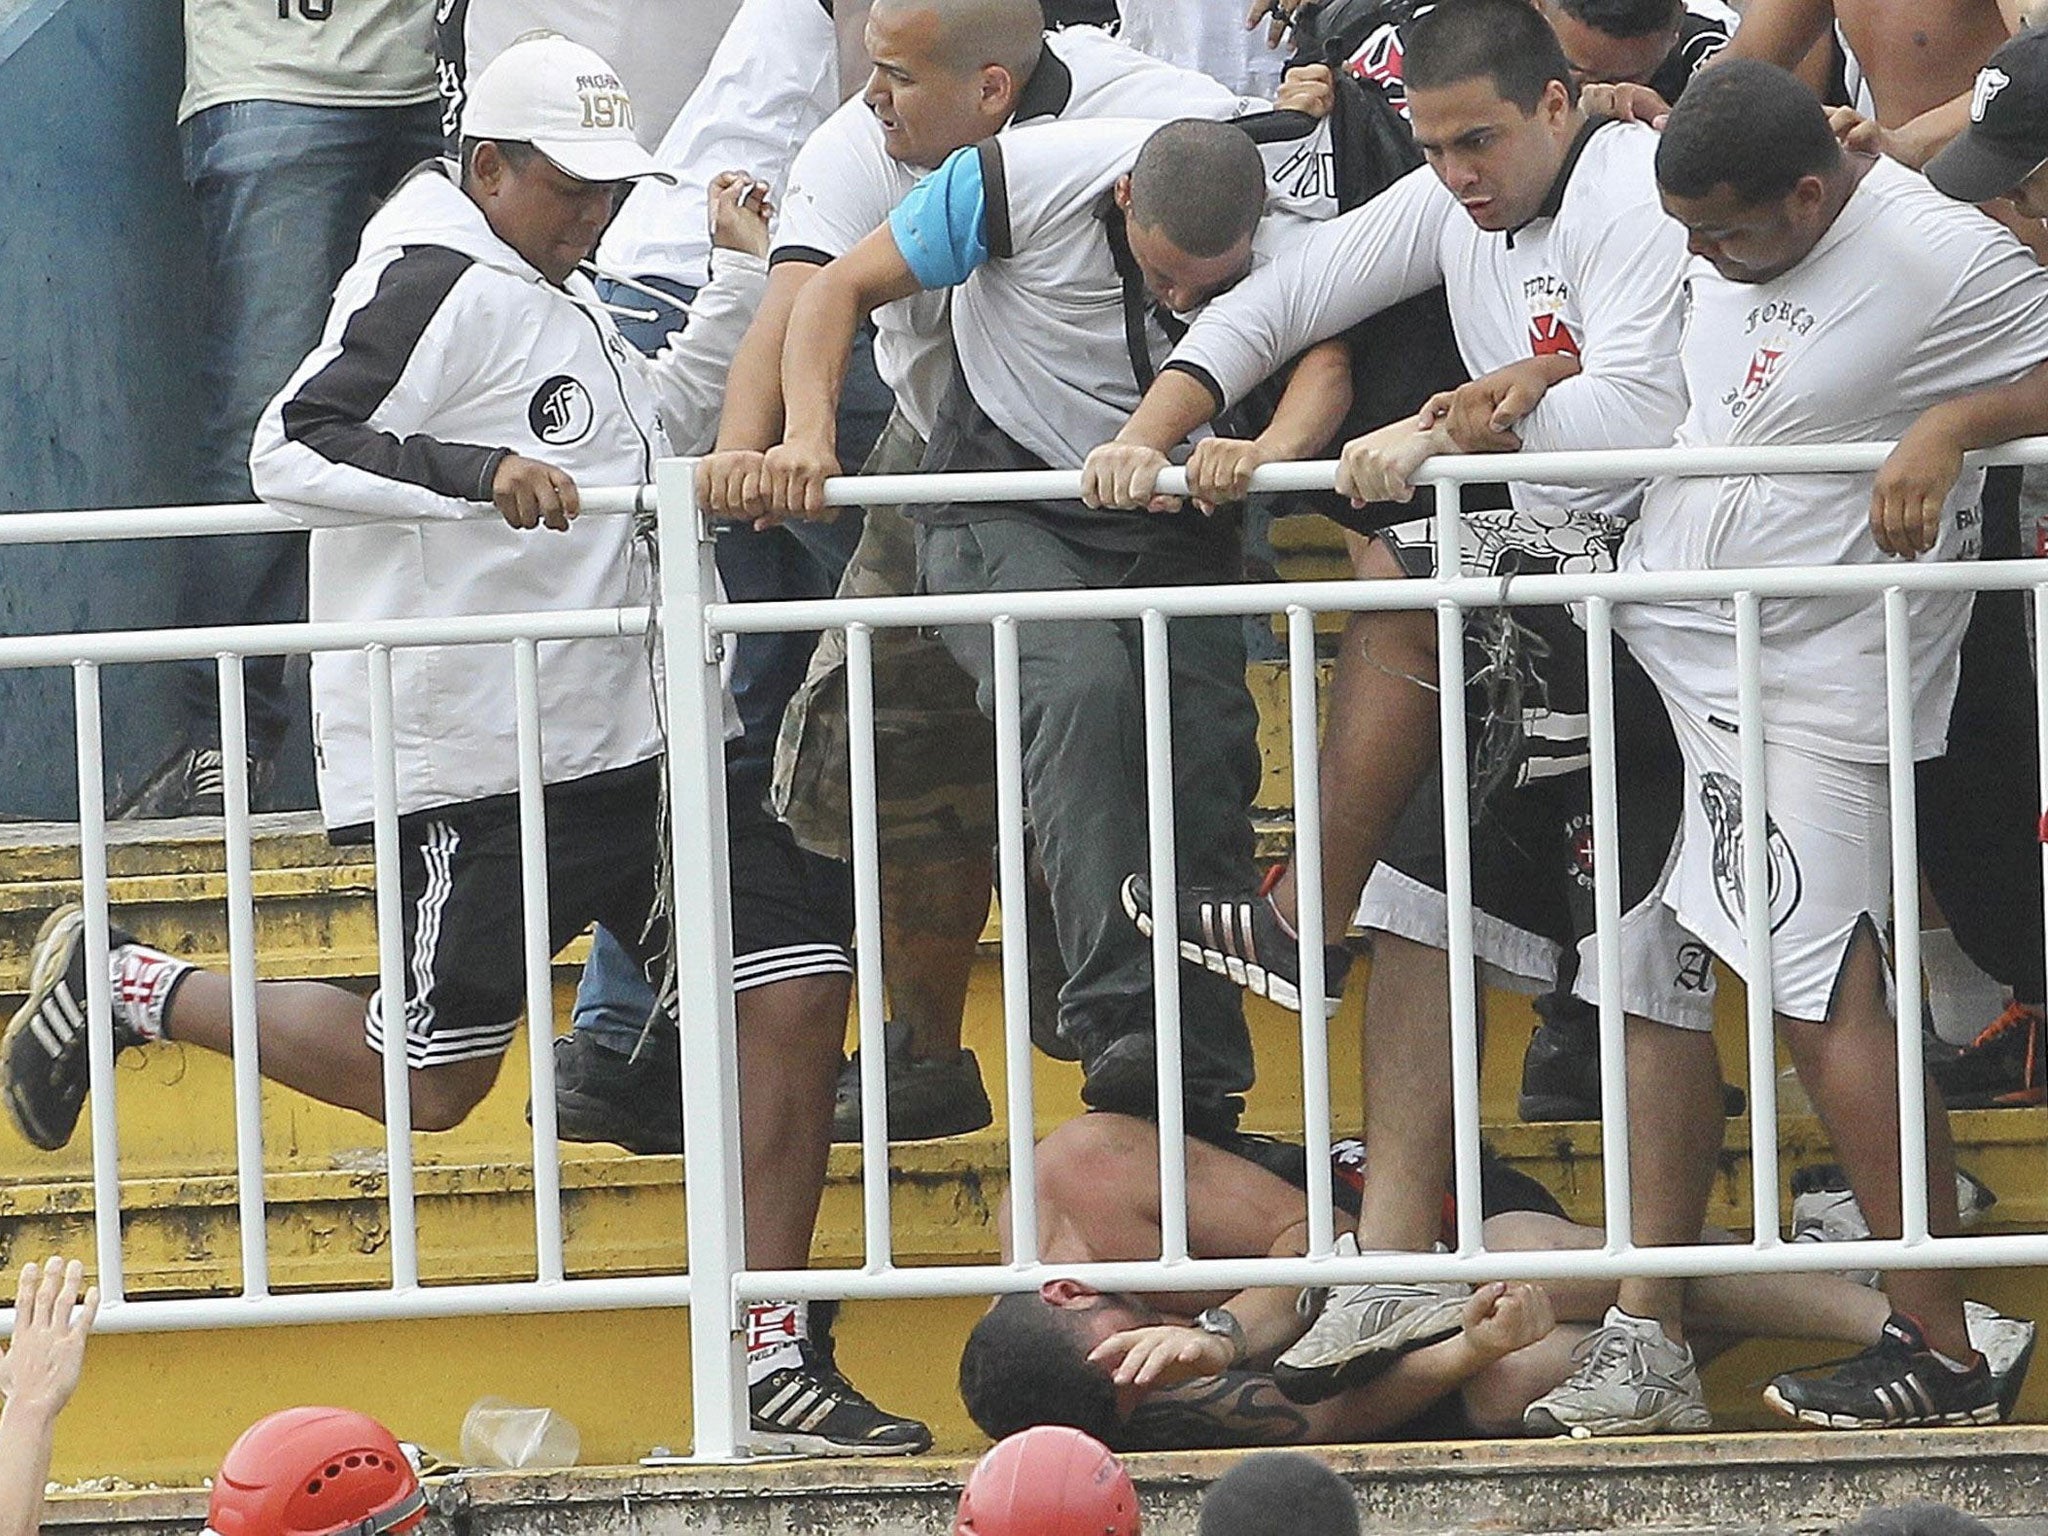 Vasco da Gama supporters attack an Atletico Paranaense fan during Sunday's game